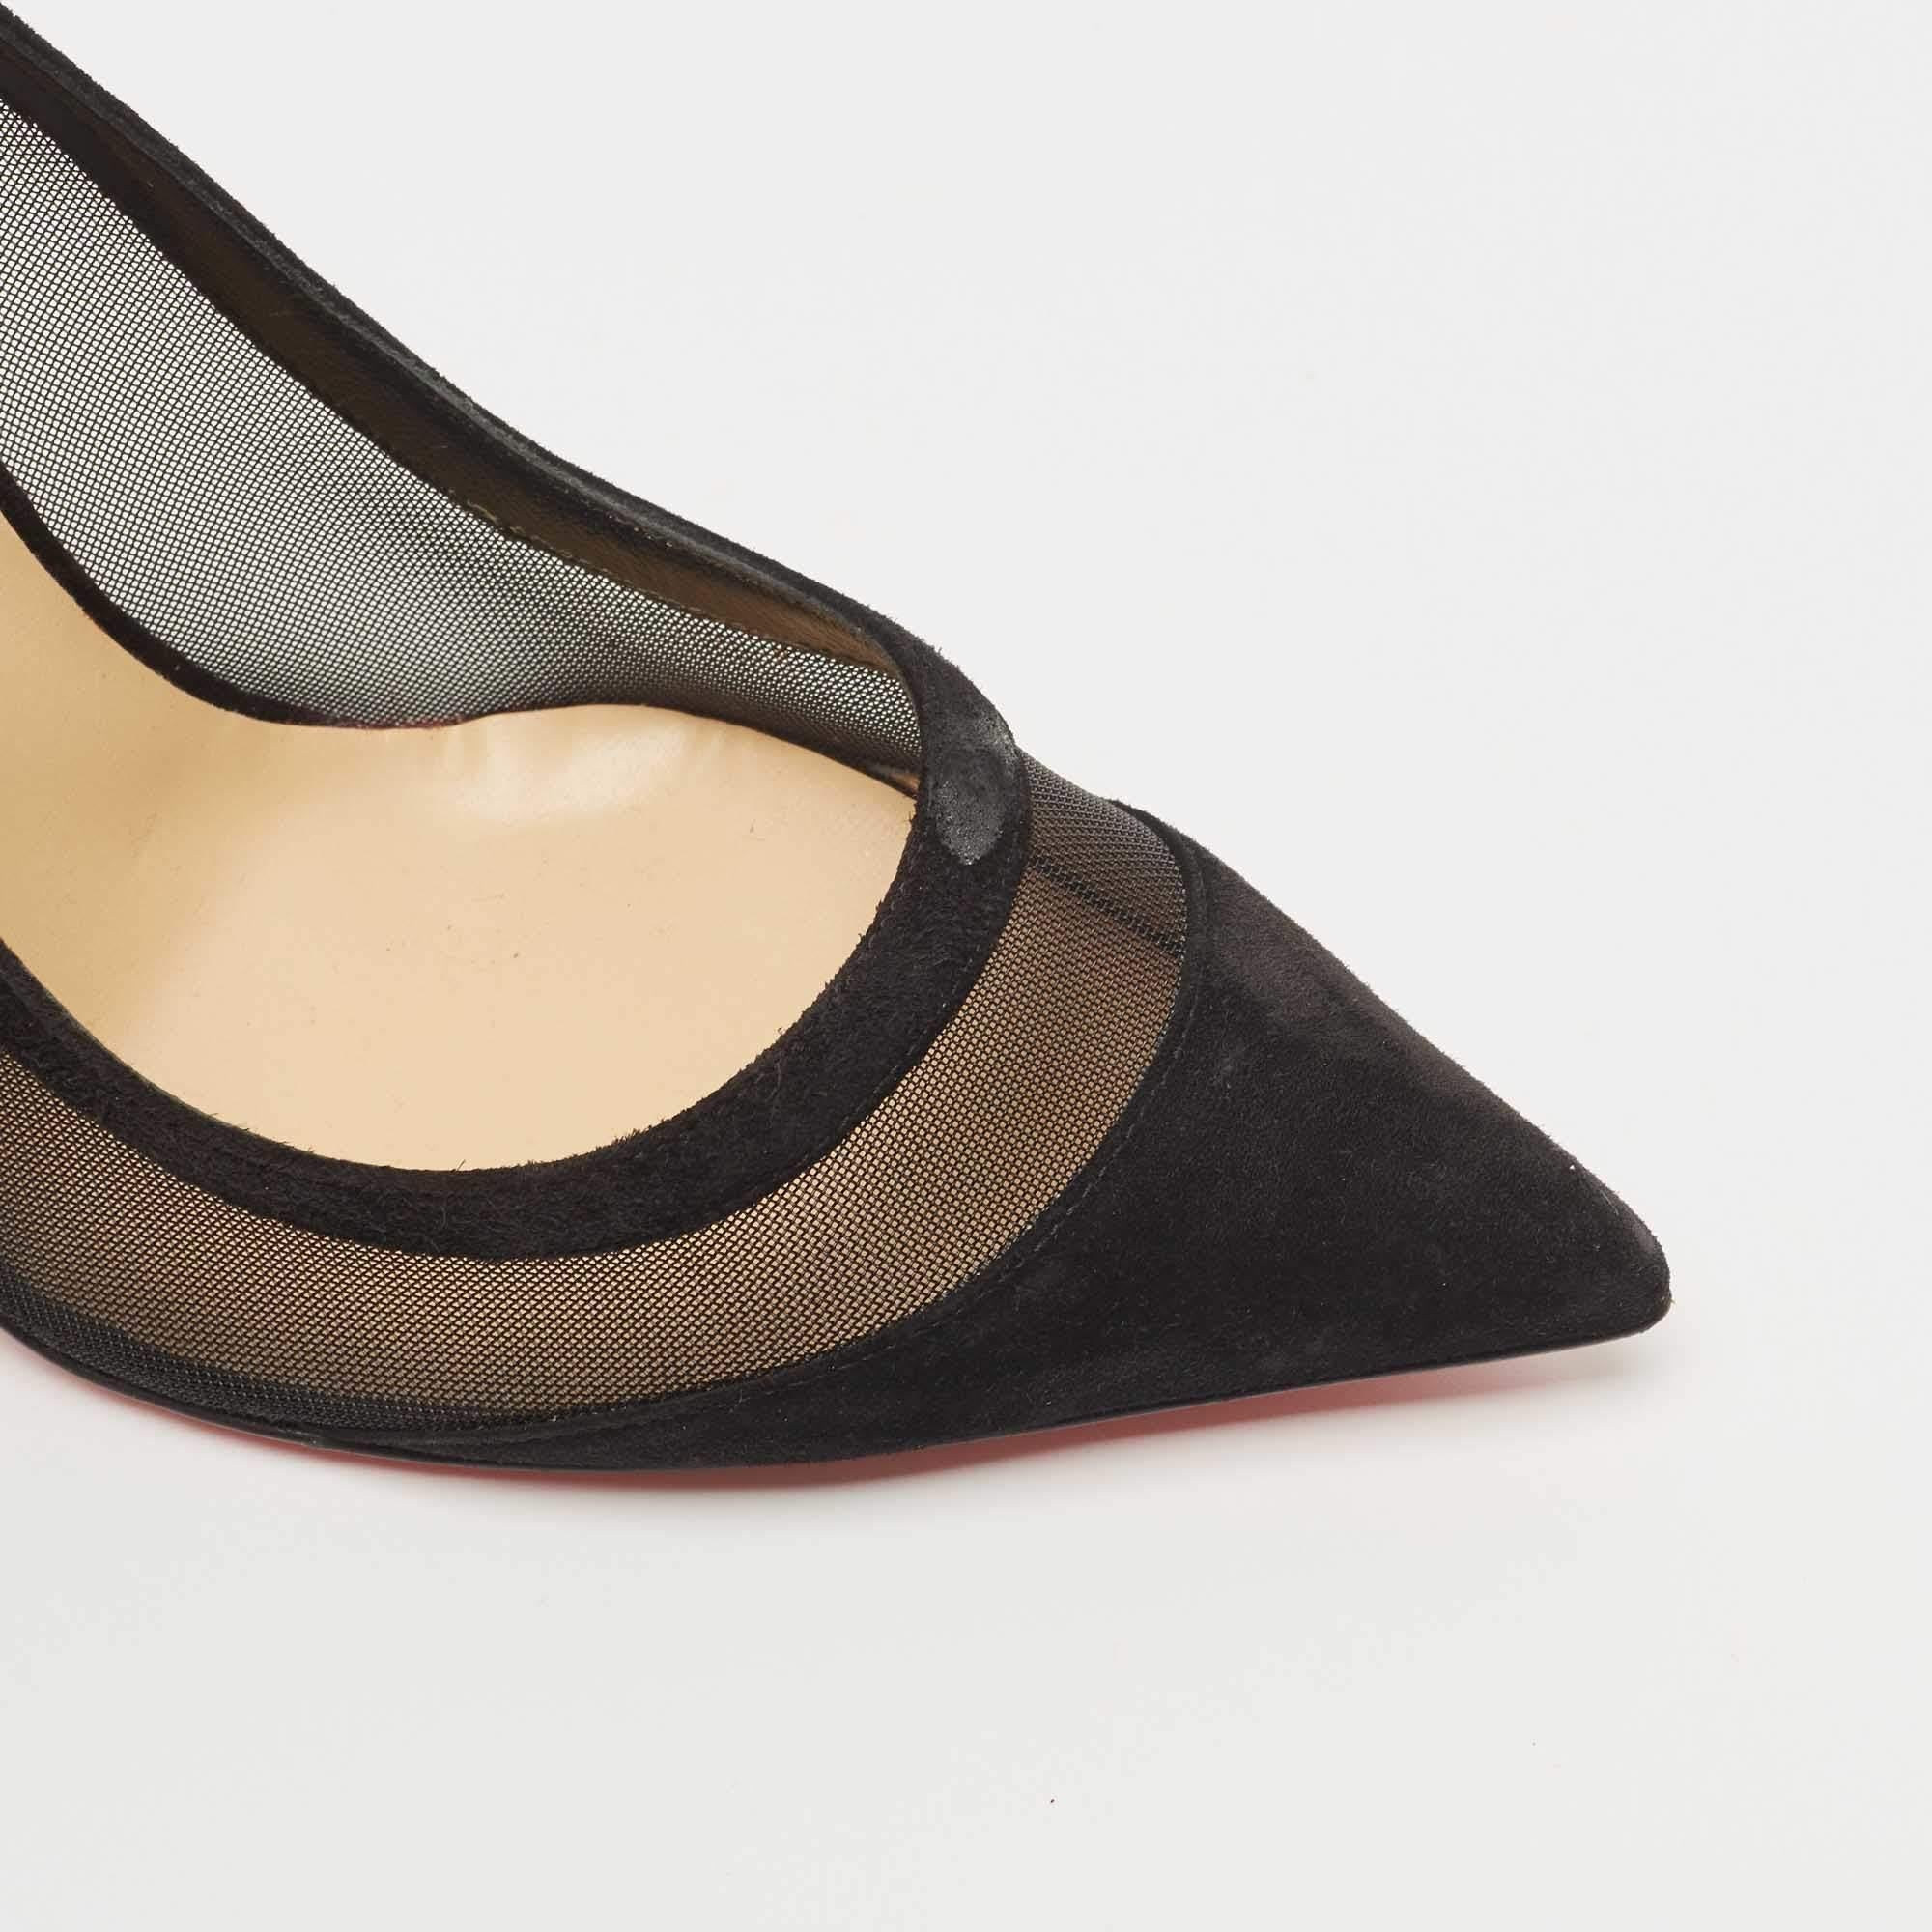 Christian Louboutin Black Mesh And Suede Galativi Pointed Toe Pumps Size 40.5 3